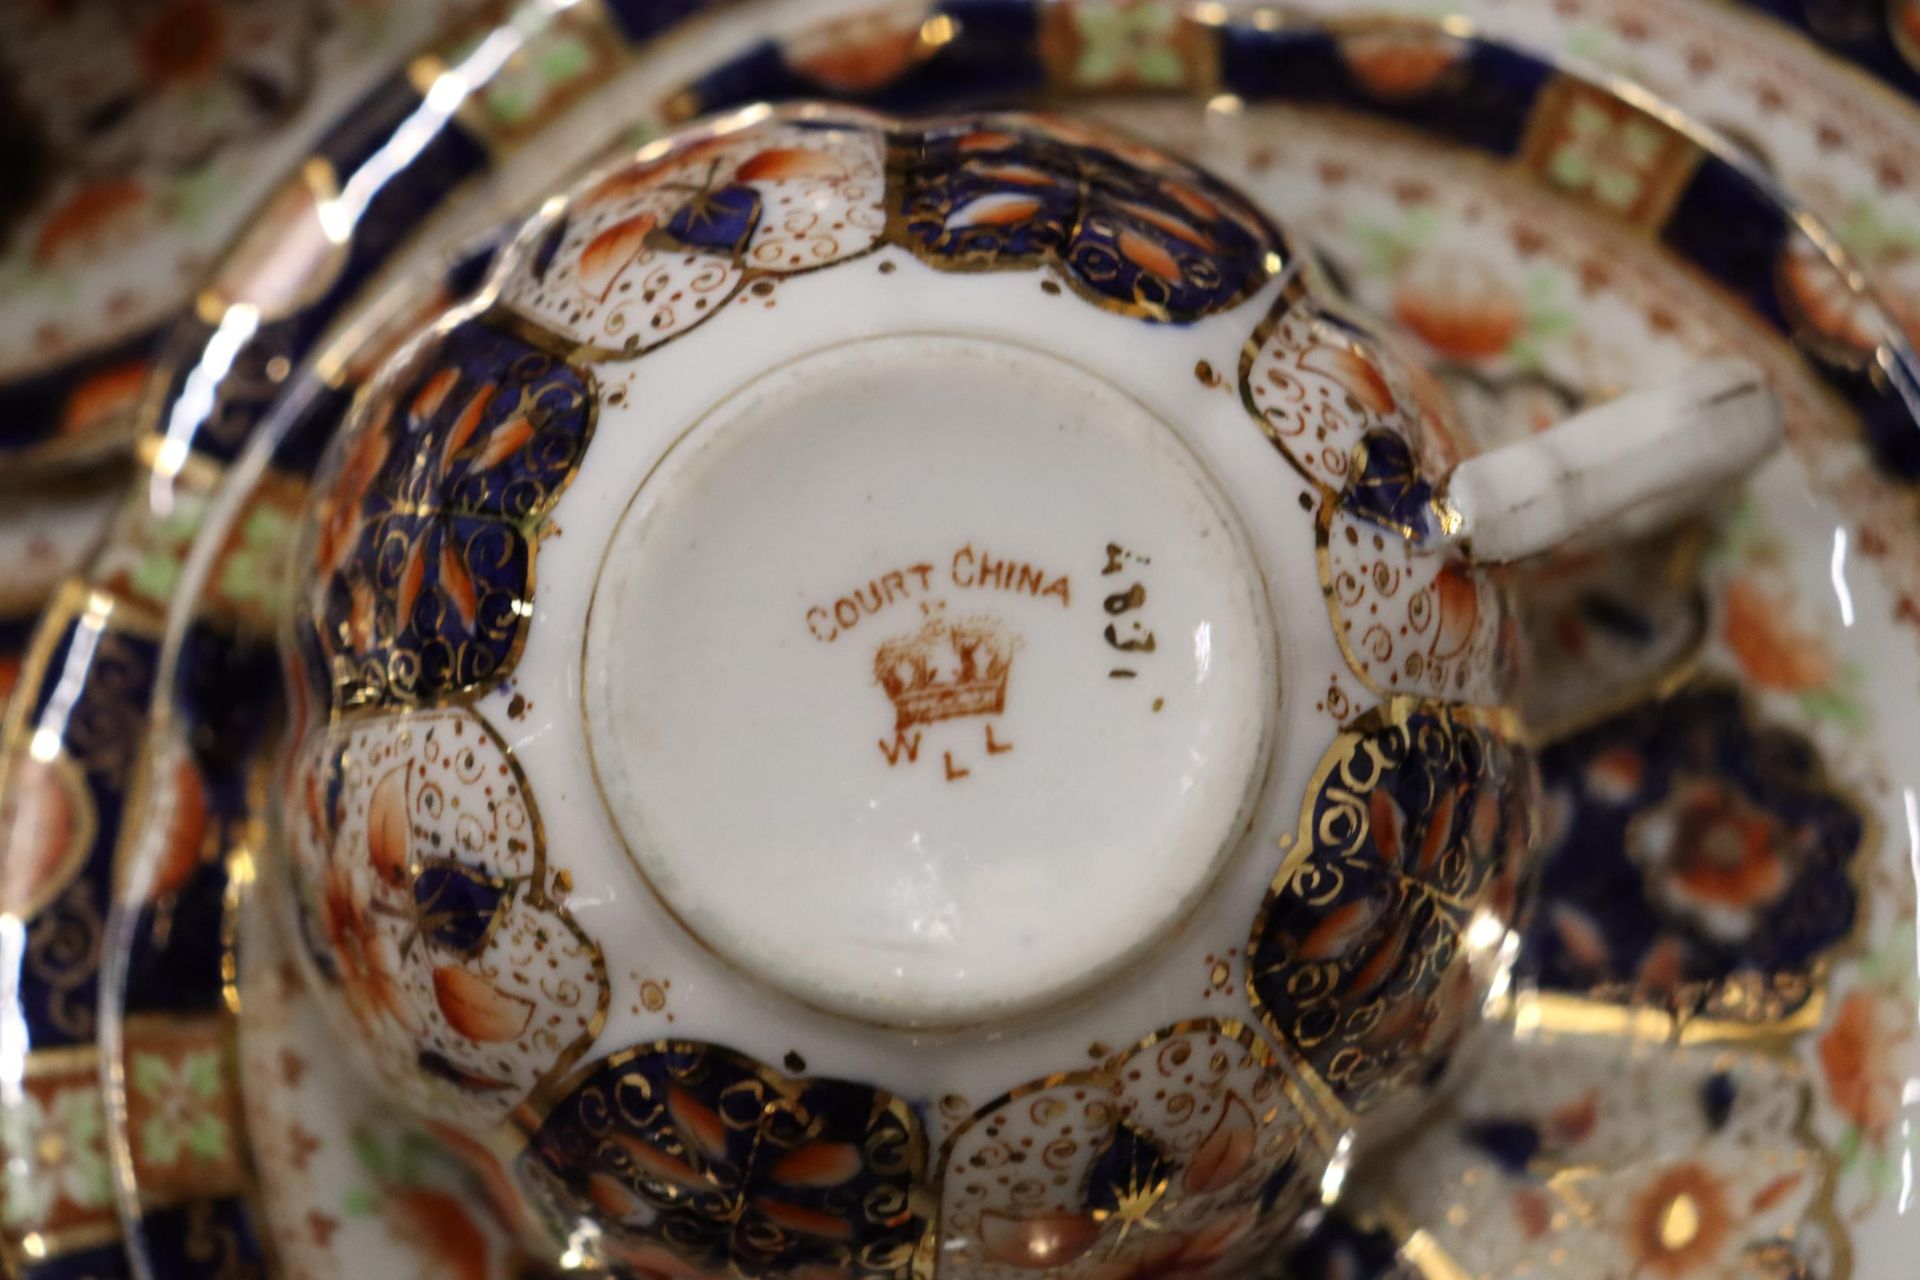 AN ANTIQUE 'COURT CHINA' TEASET TO INCLUDE CAKE PLATES, CUPS, SAUCERS, SIDE PLATES AND A SUGAR BOWL - Bild 9 aus 9